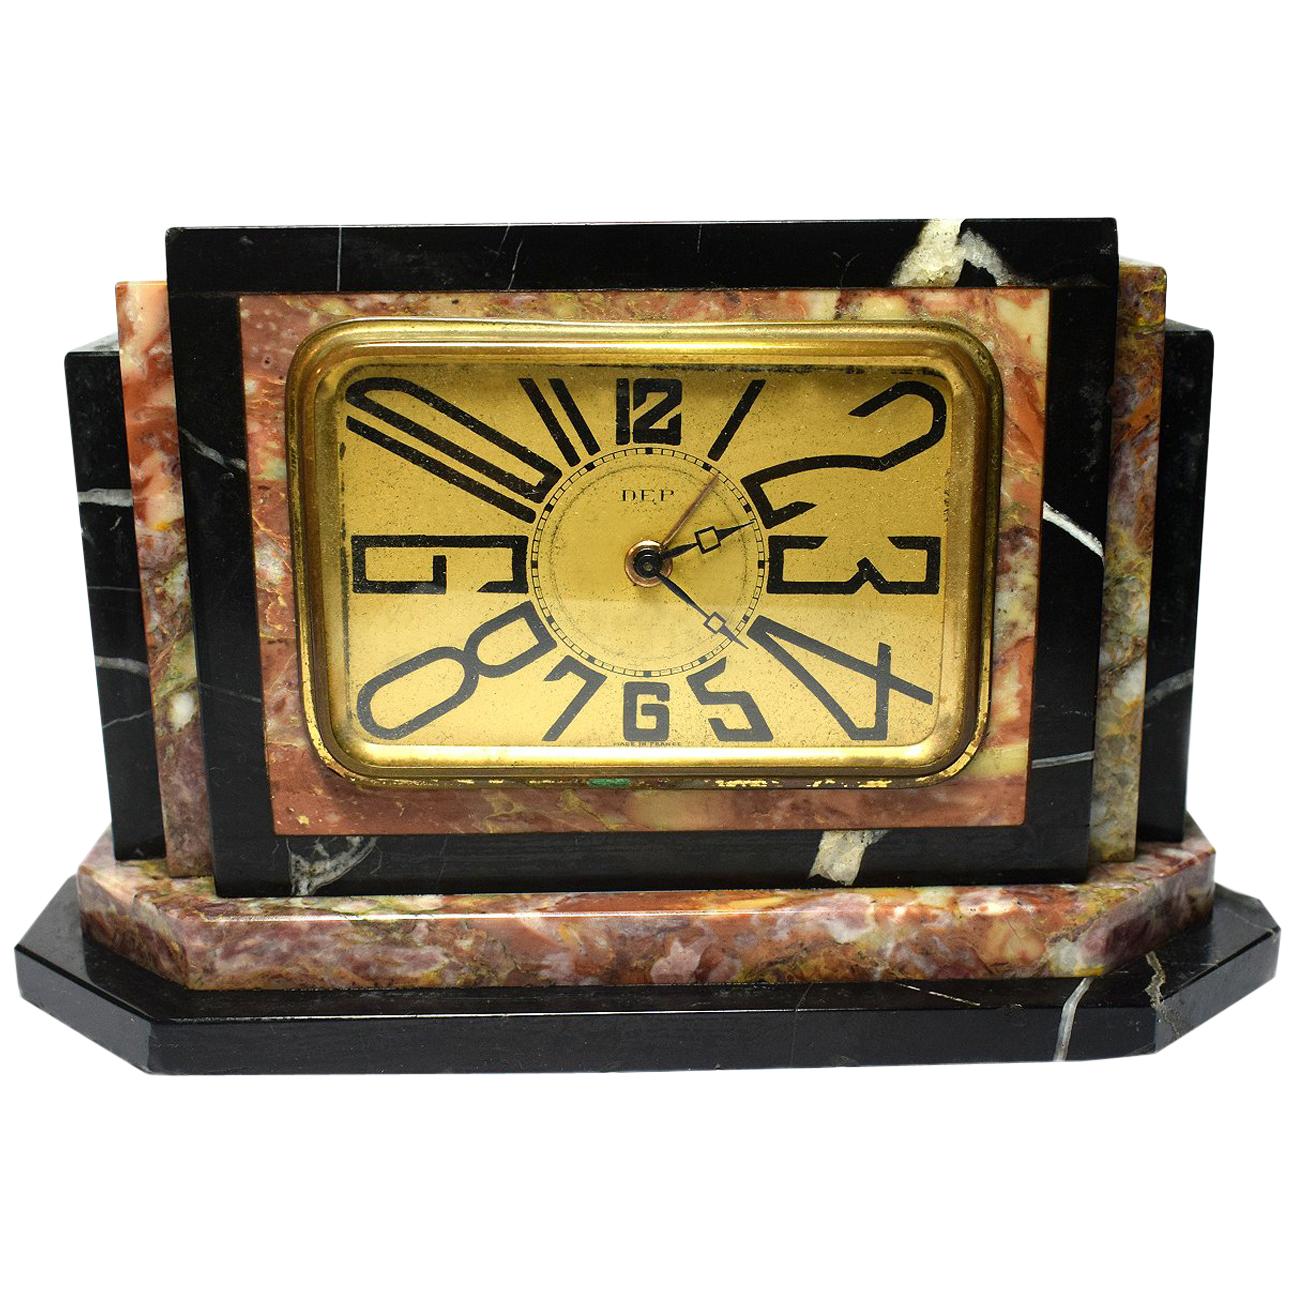 1930s Art Deco Small Marble Clock by Dep